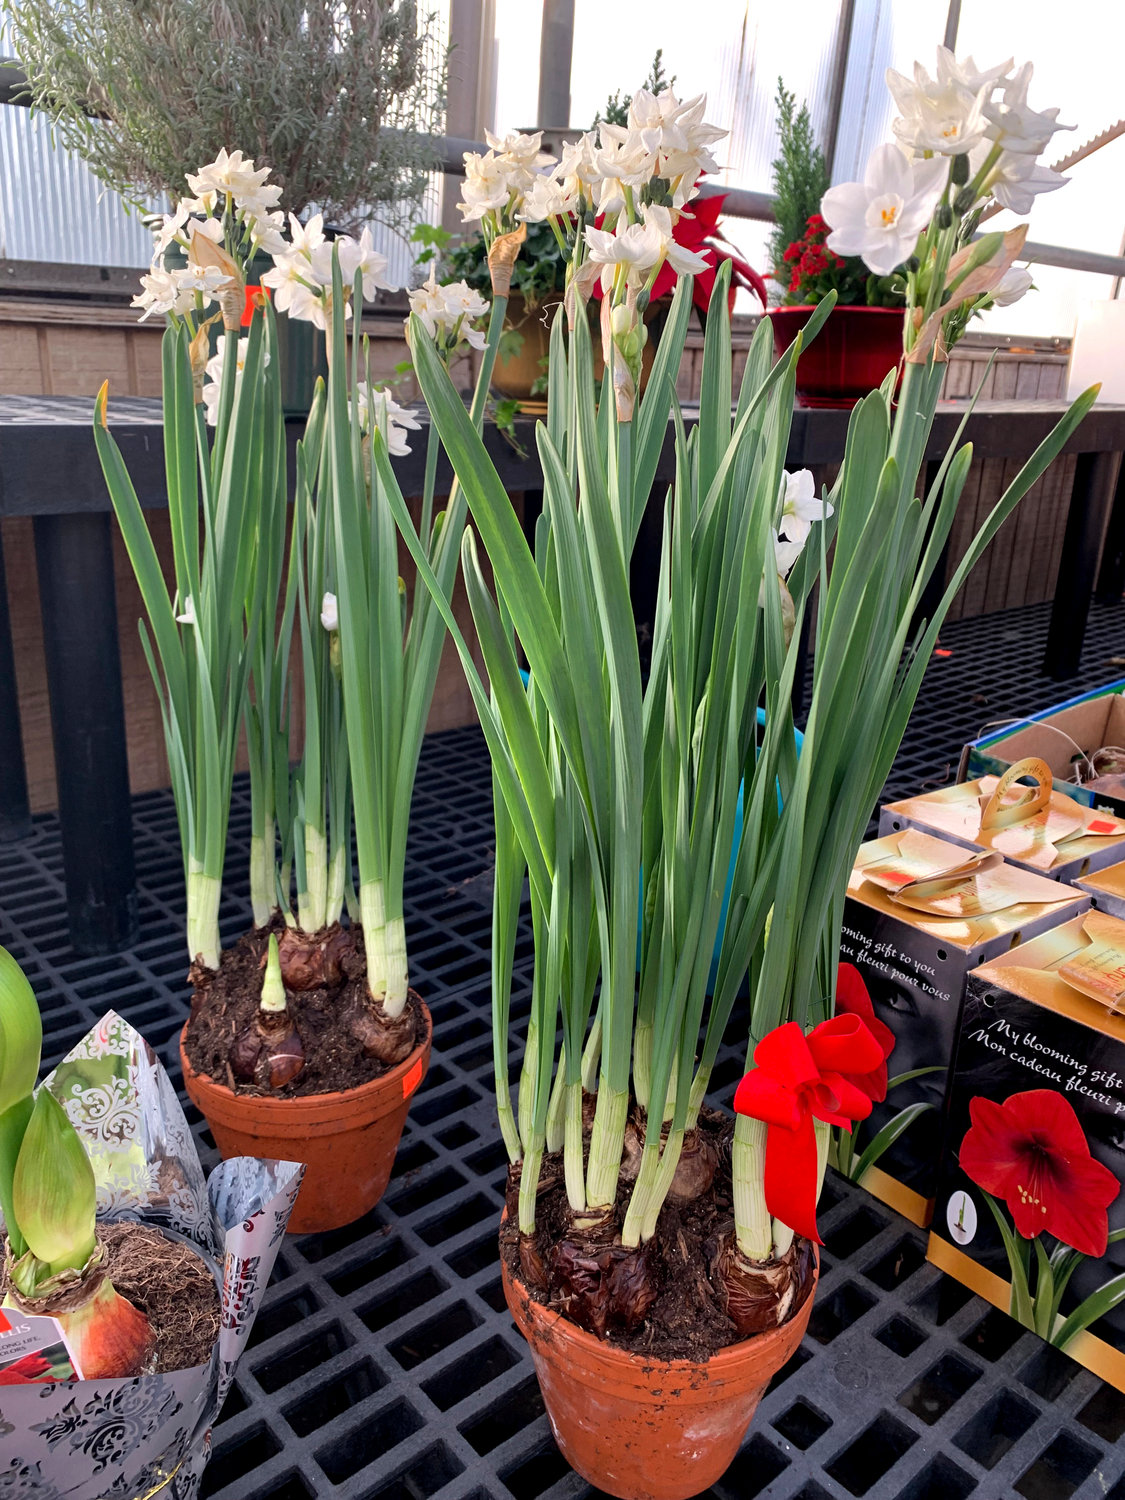 Paperwhites appear on display at a nursery in Larchmont on Monday, Dec. 5. The plant’s bulbs are pre-chilled so they can be planted now and produce flowers in four to six weeks. They do well planted in a shallow container of soil.